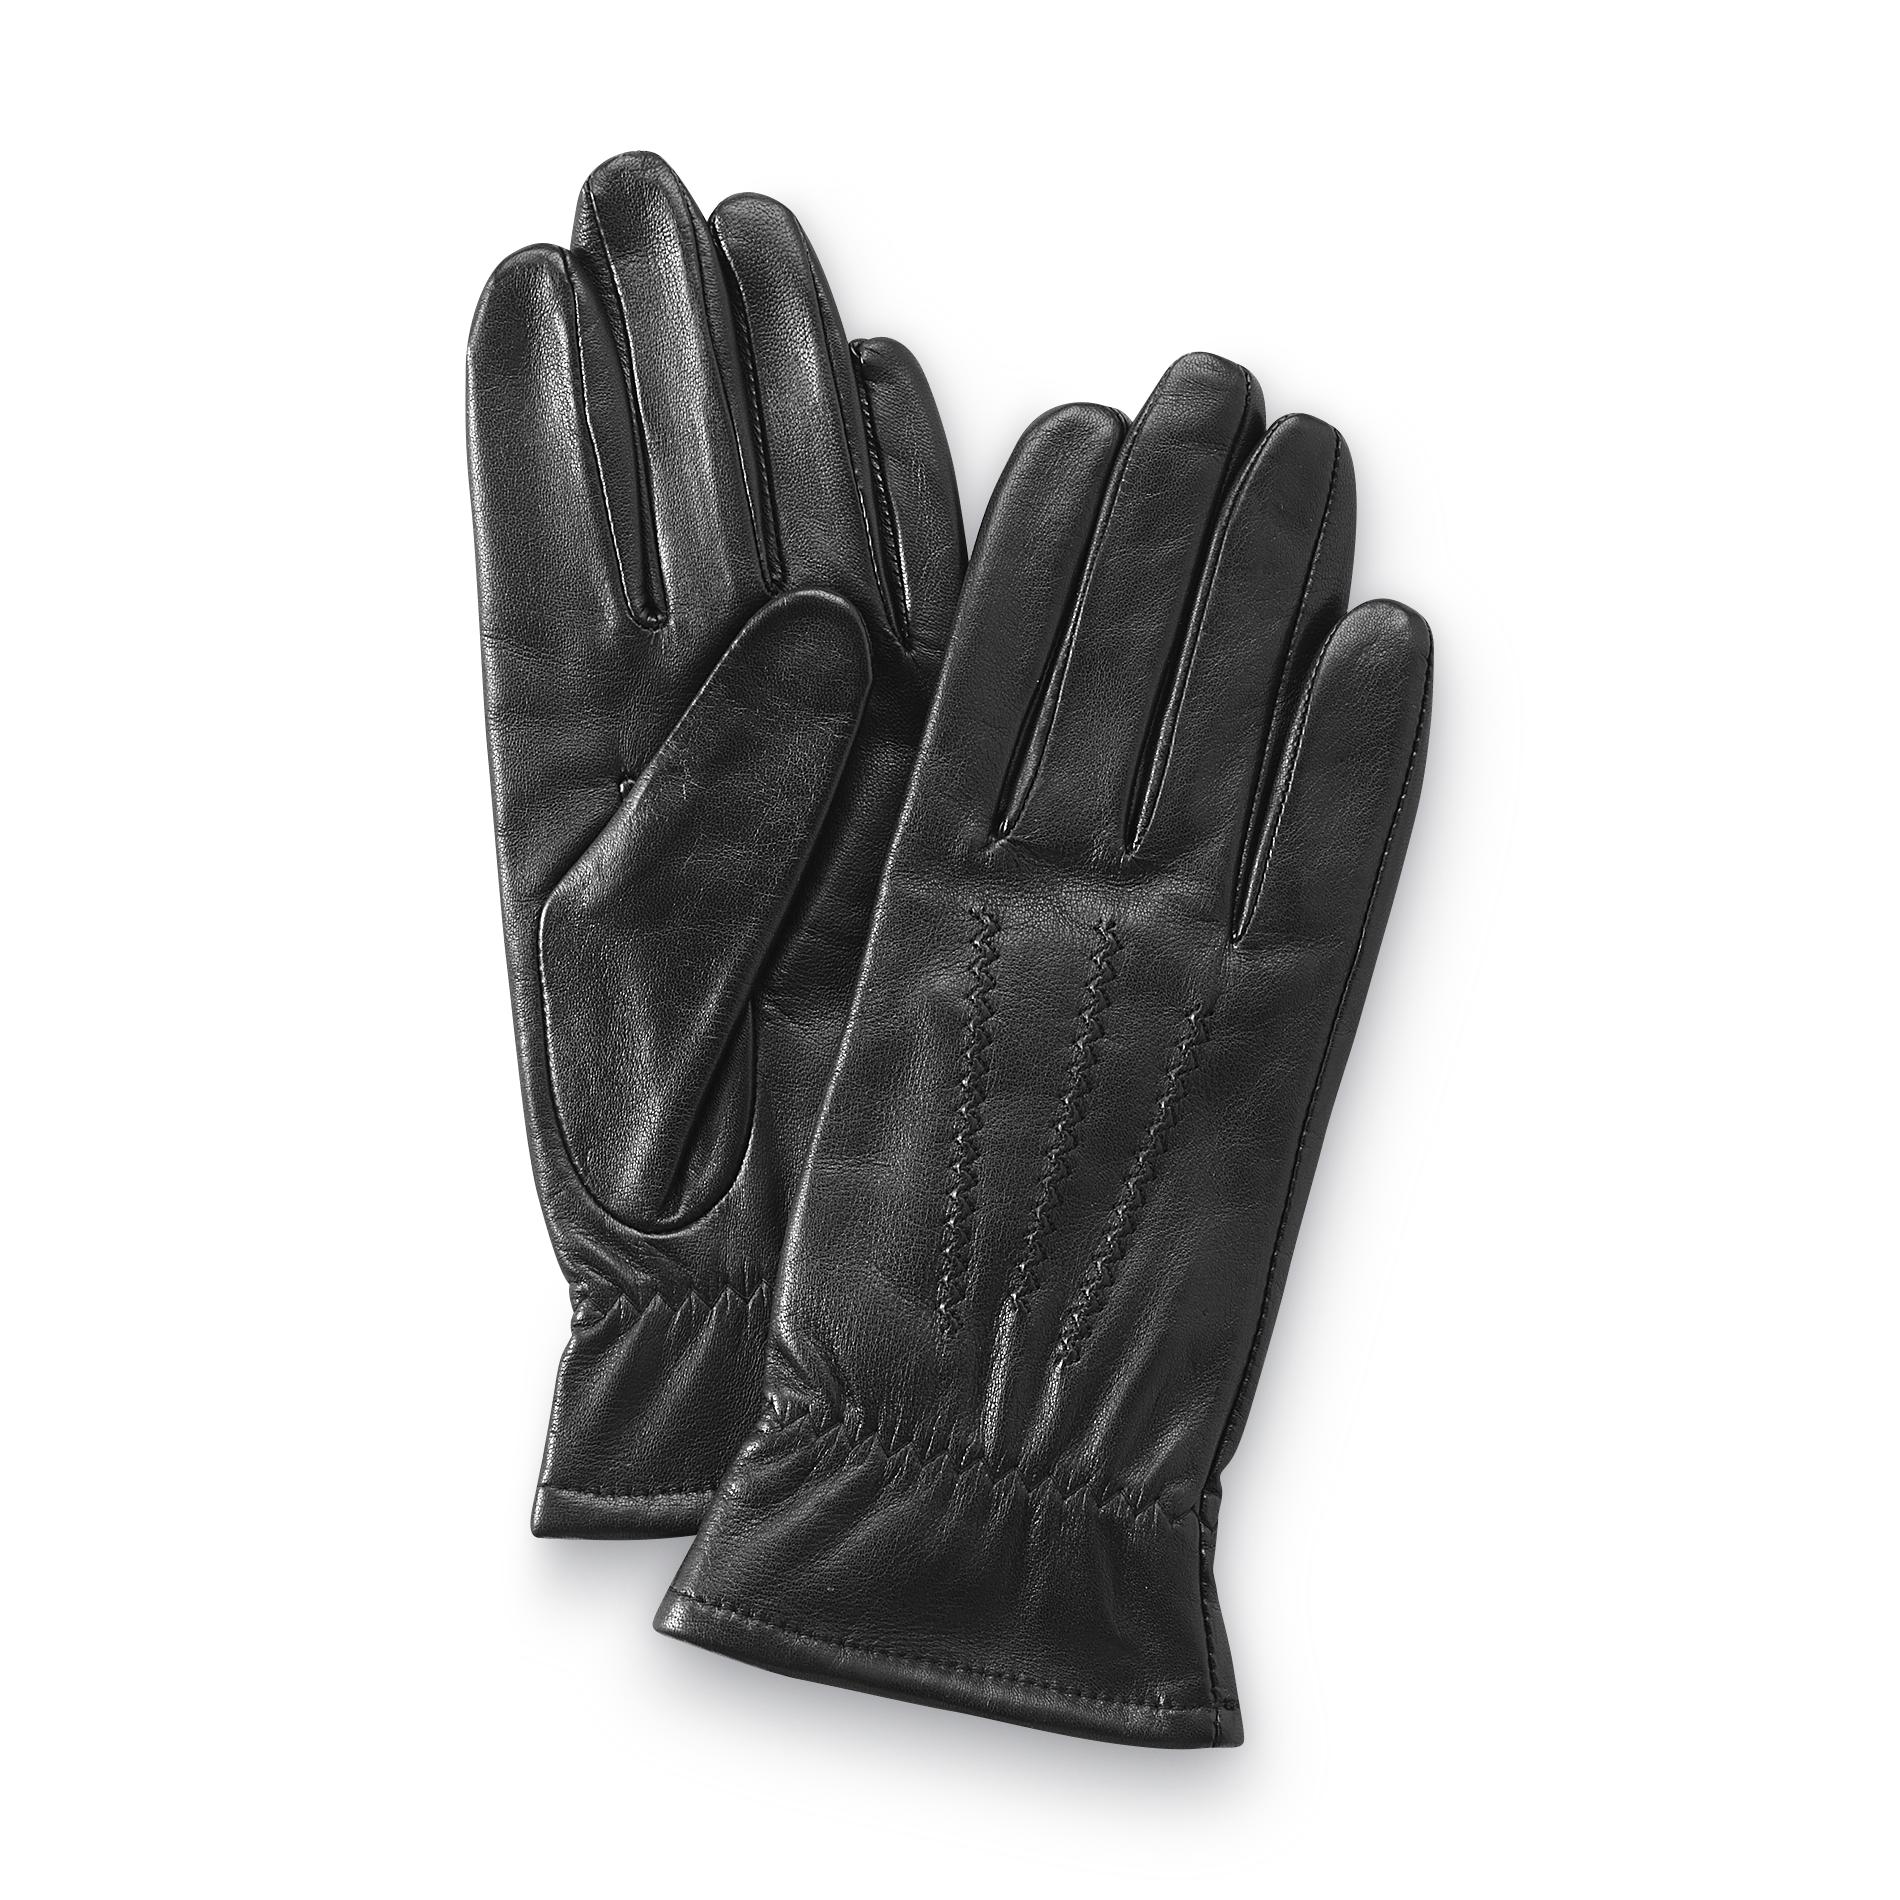 Jaclyn Smith Women's Lined Leather Gloves - Topstitched